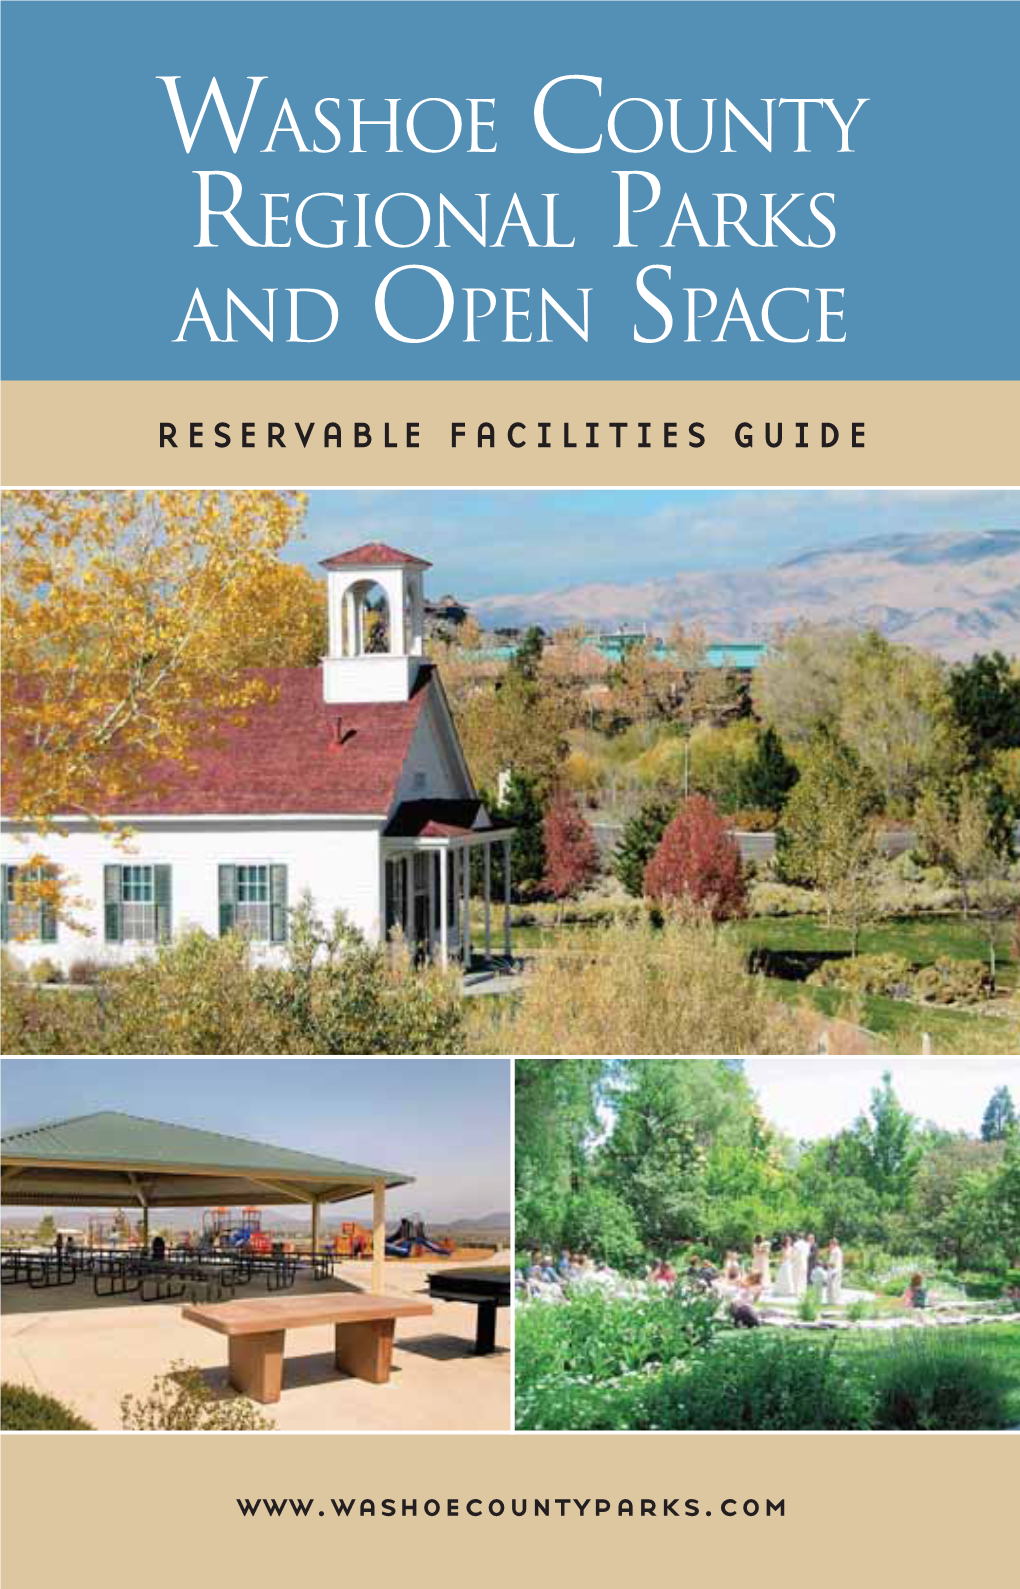 Washoe County Regional Parks and Open Space